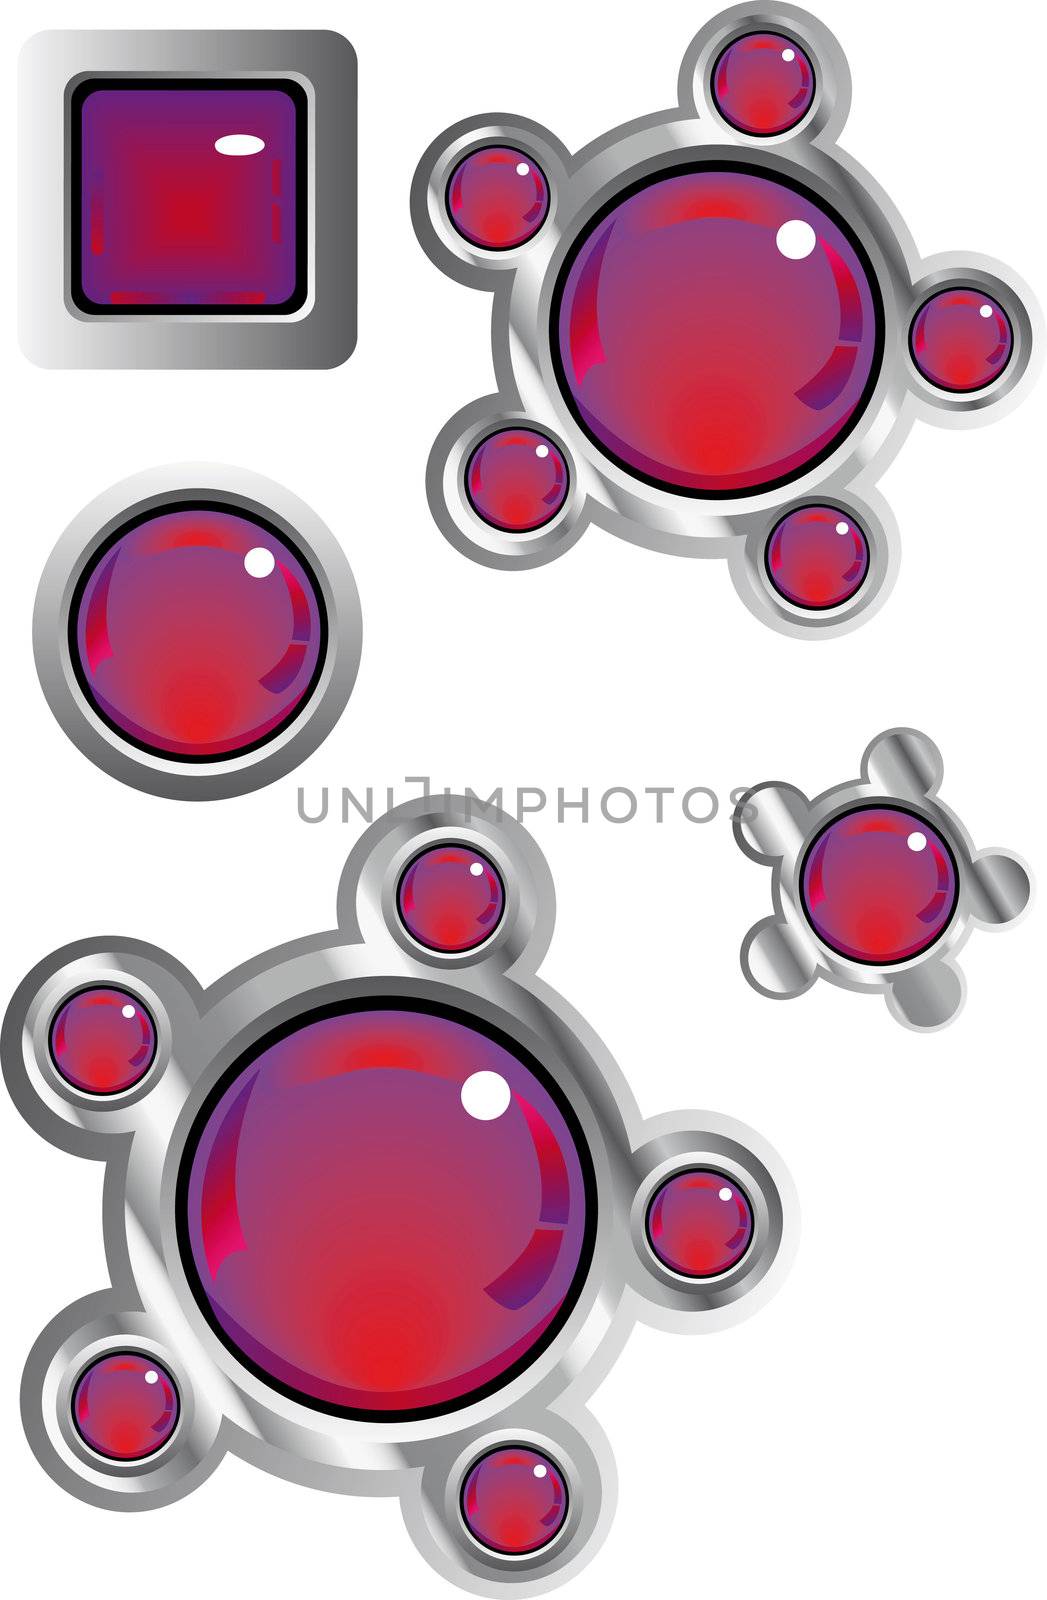 collection of fancy glass look web buttons in red and purple